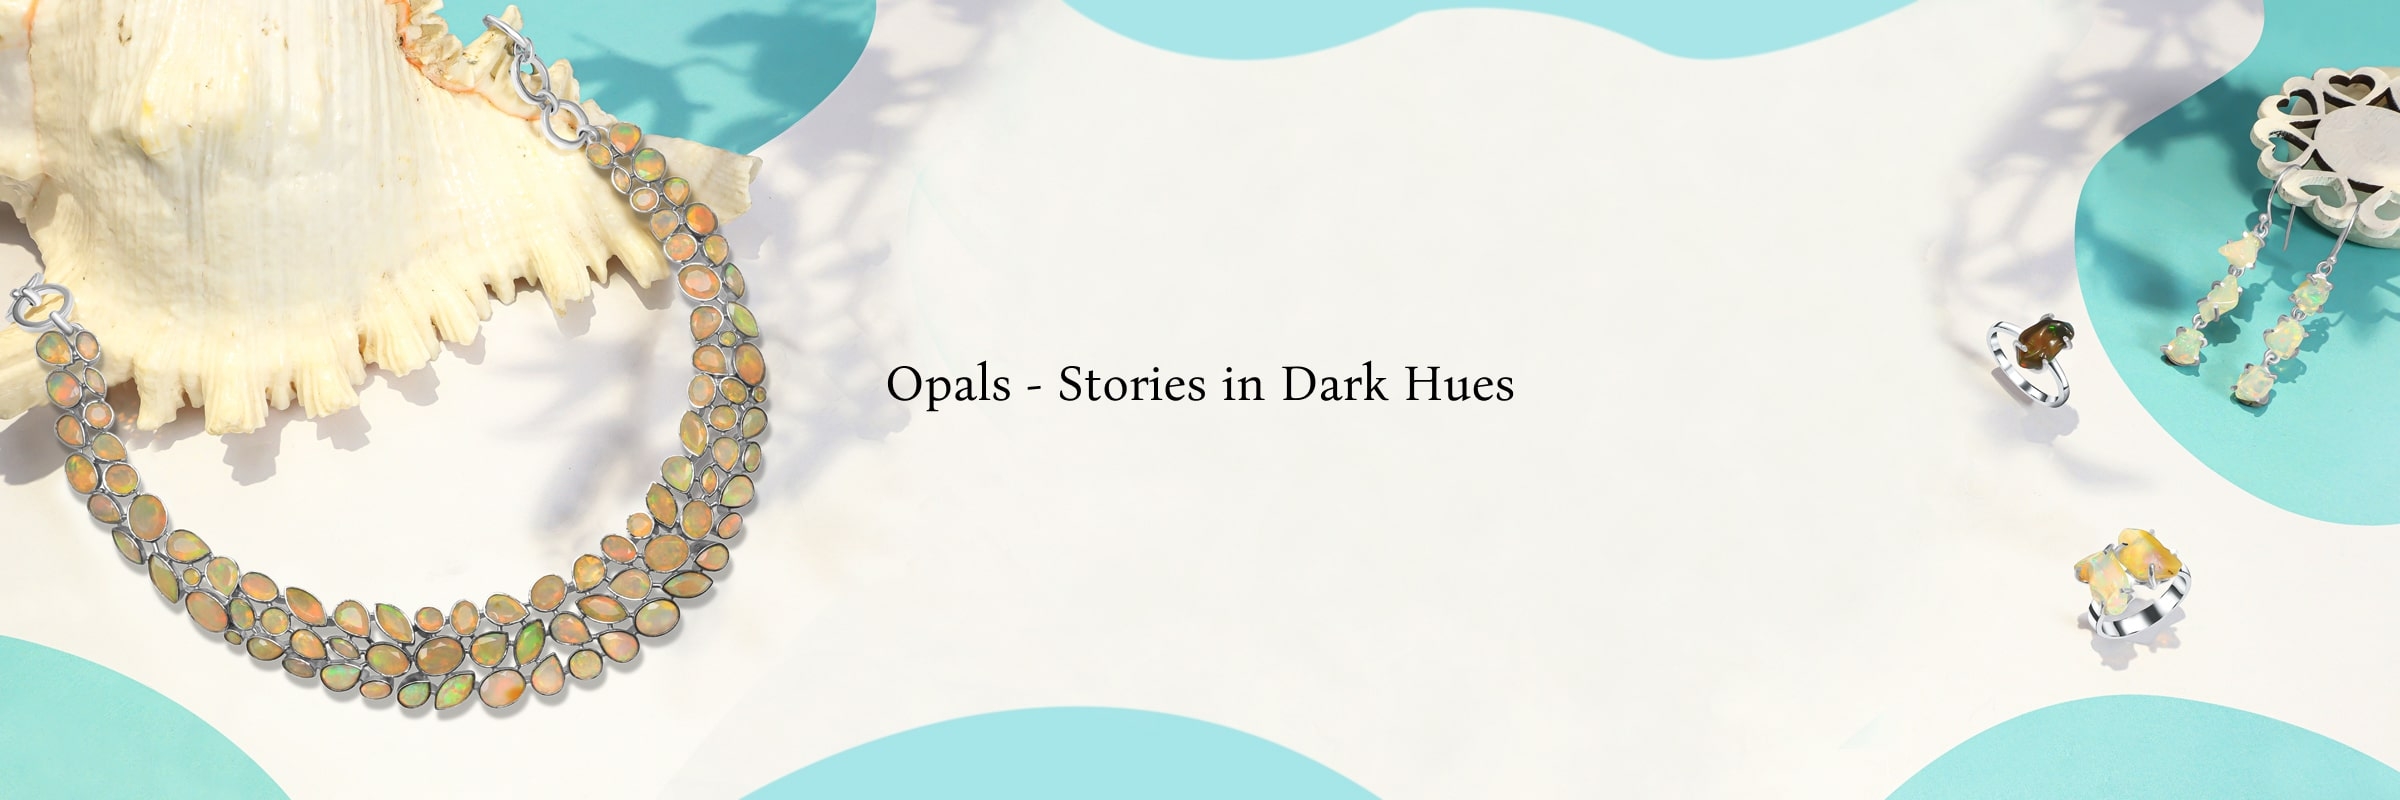 The Darker Tales of Opals